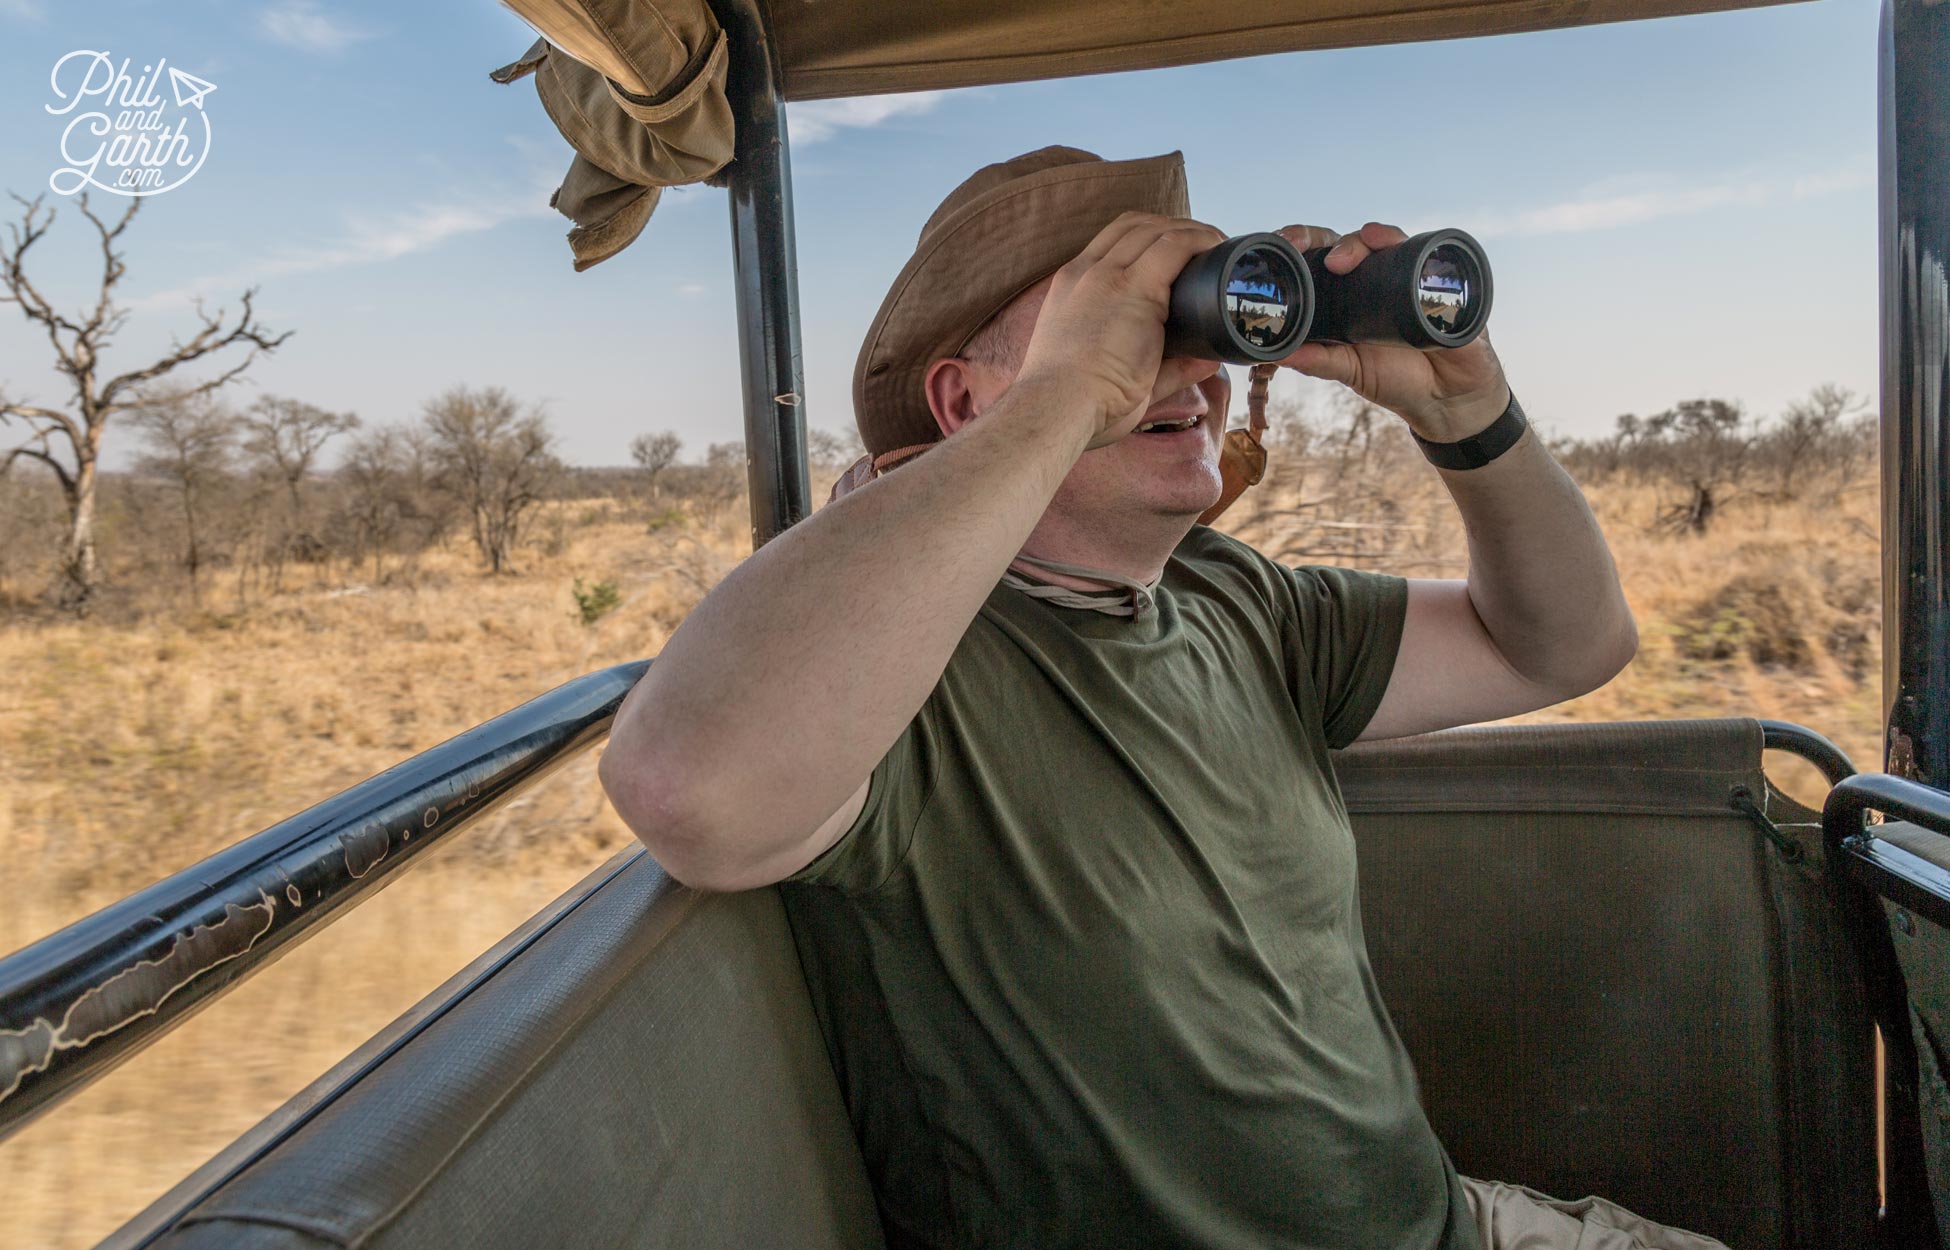 Phil checking out the wildlife with his binoculars